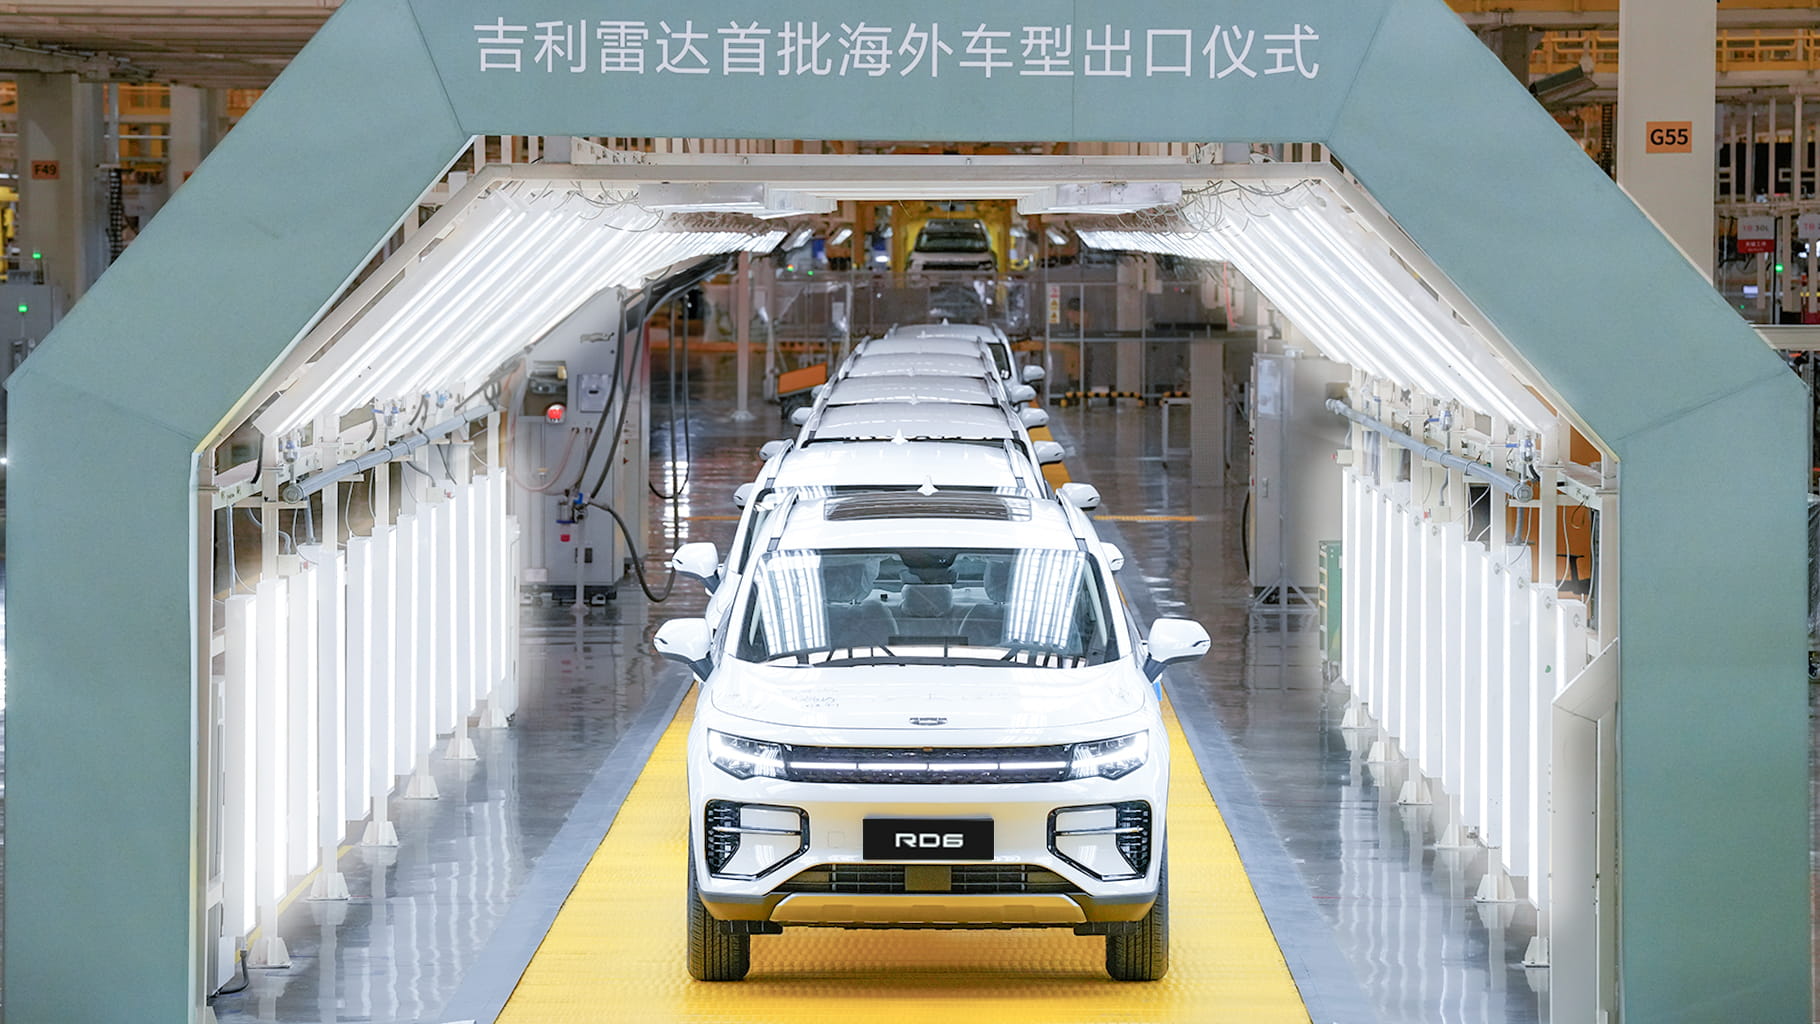 Geely RIDDARA has become a leader in the new energy automobile industry in central Shandong Province, building an advanced vehicle production system.